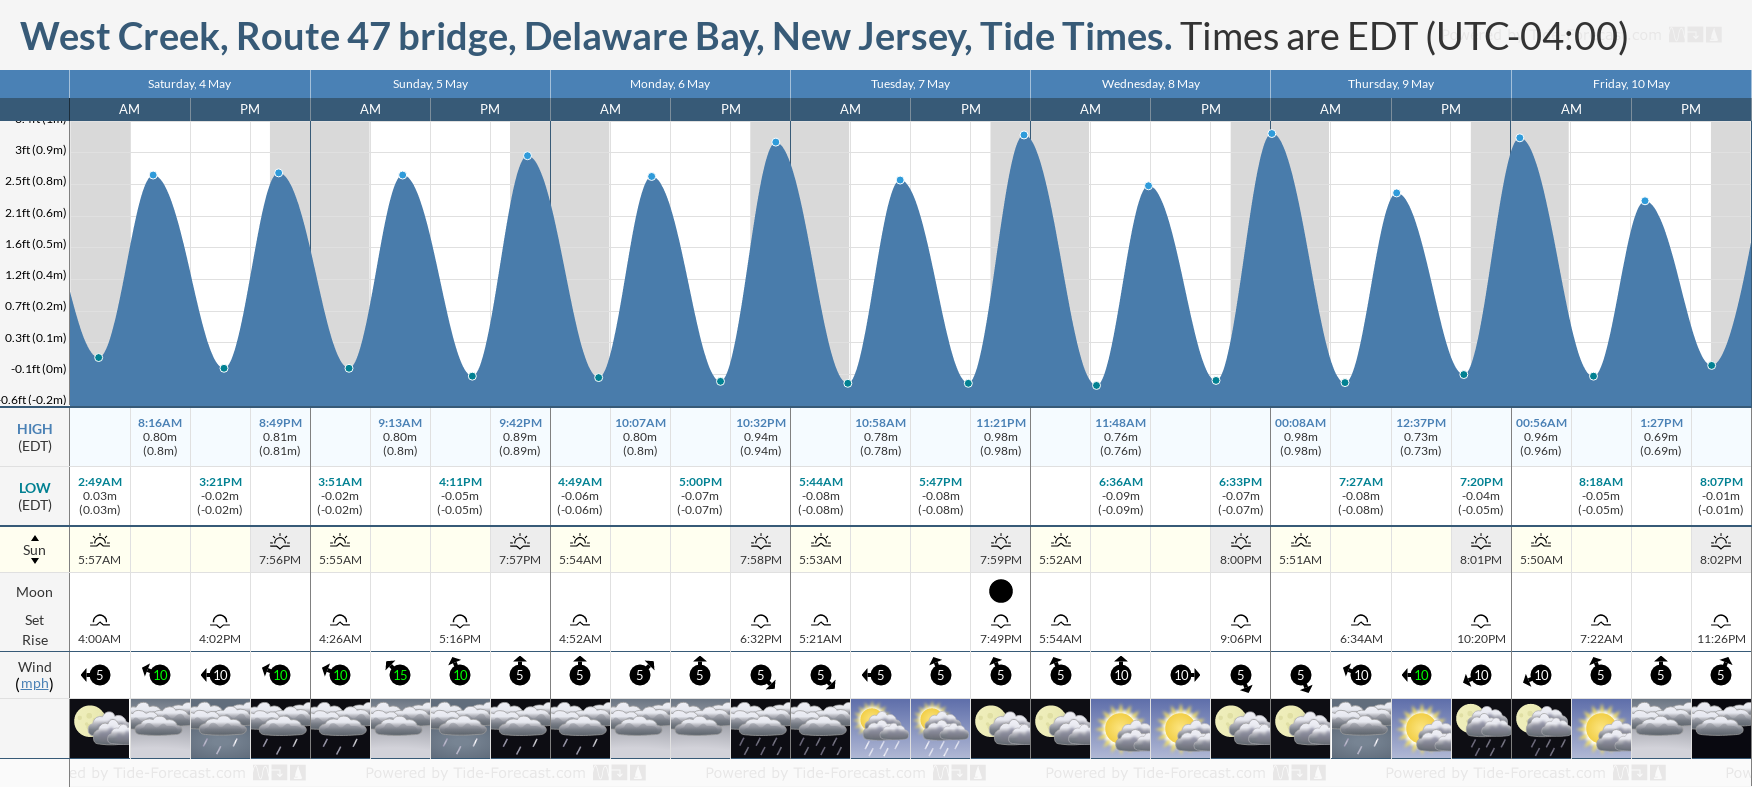 West Creek, Route 47 bridge, Delaware Bay, New Jersey Tide Chart including high and low tide tide times for the next 7 days